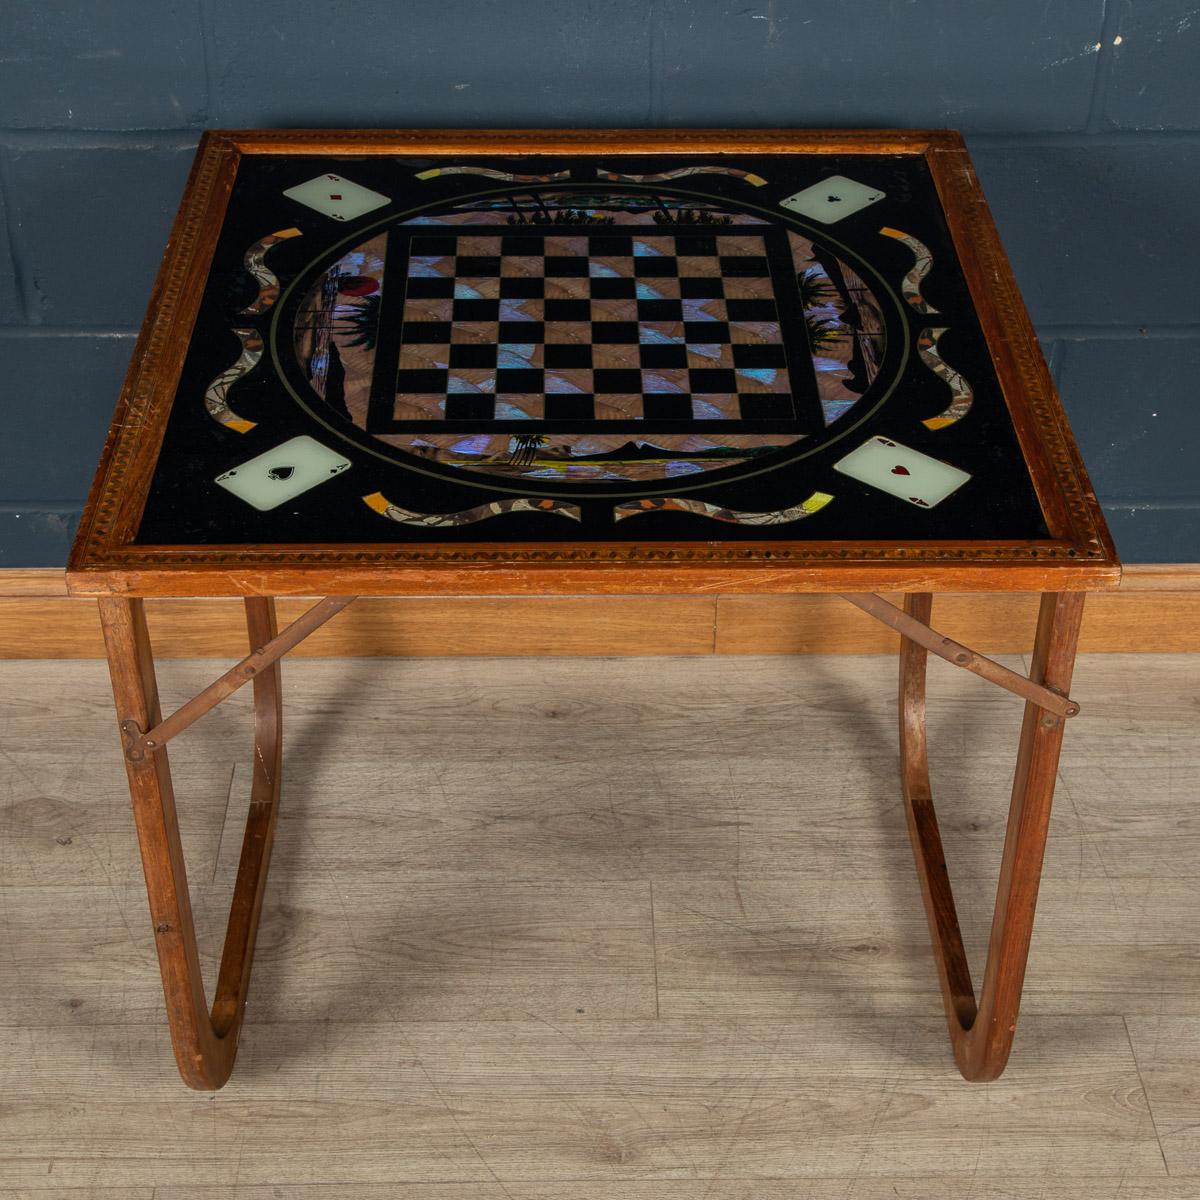 Antique 19th Century extremely rare foldable games table. This type of workmanship was quite popular in the Victorian era. The glass top is reverse painted, leaving sections of the glass transparent. These transparent sections were then decorated